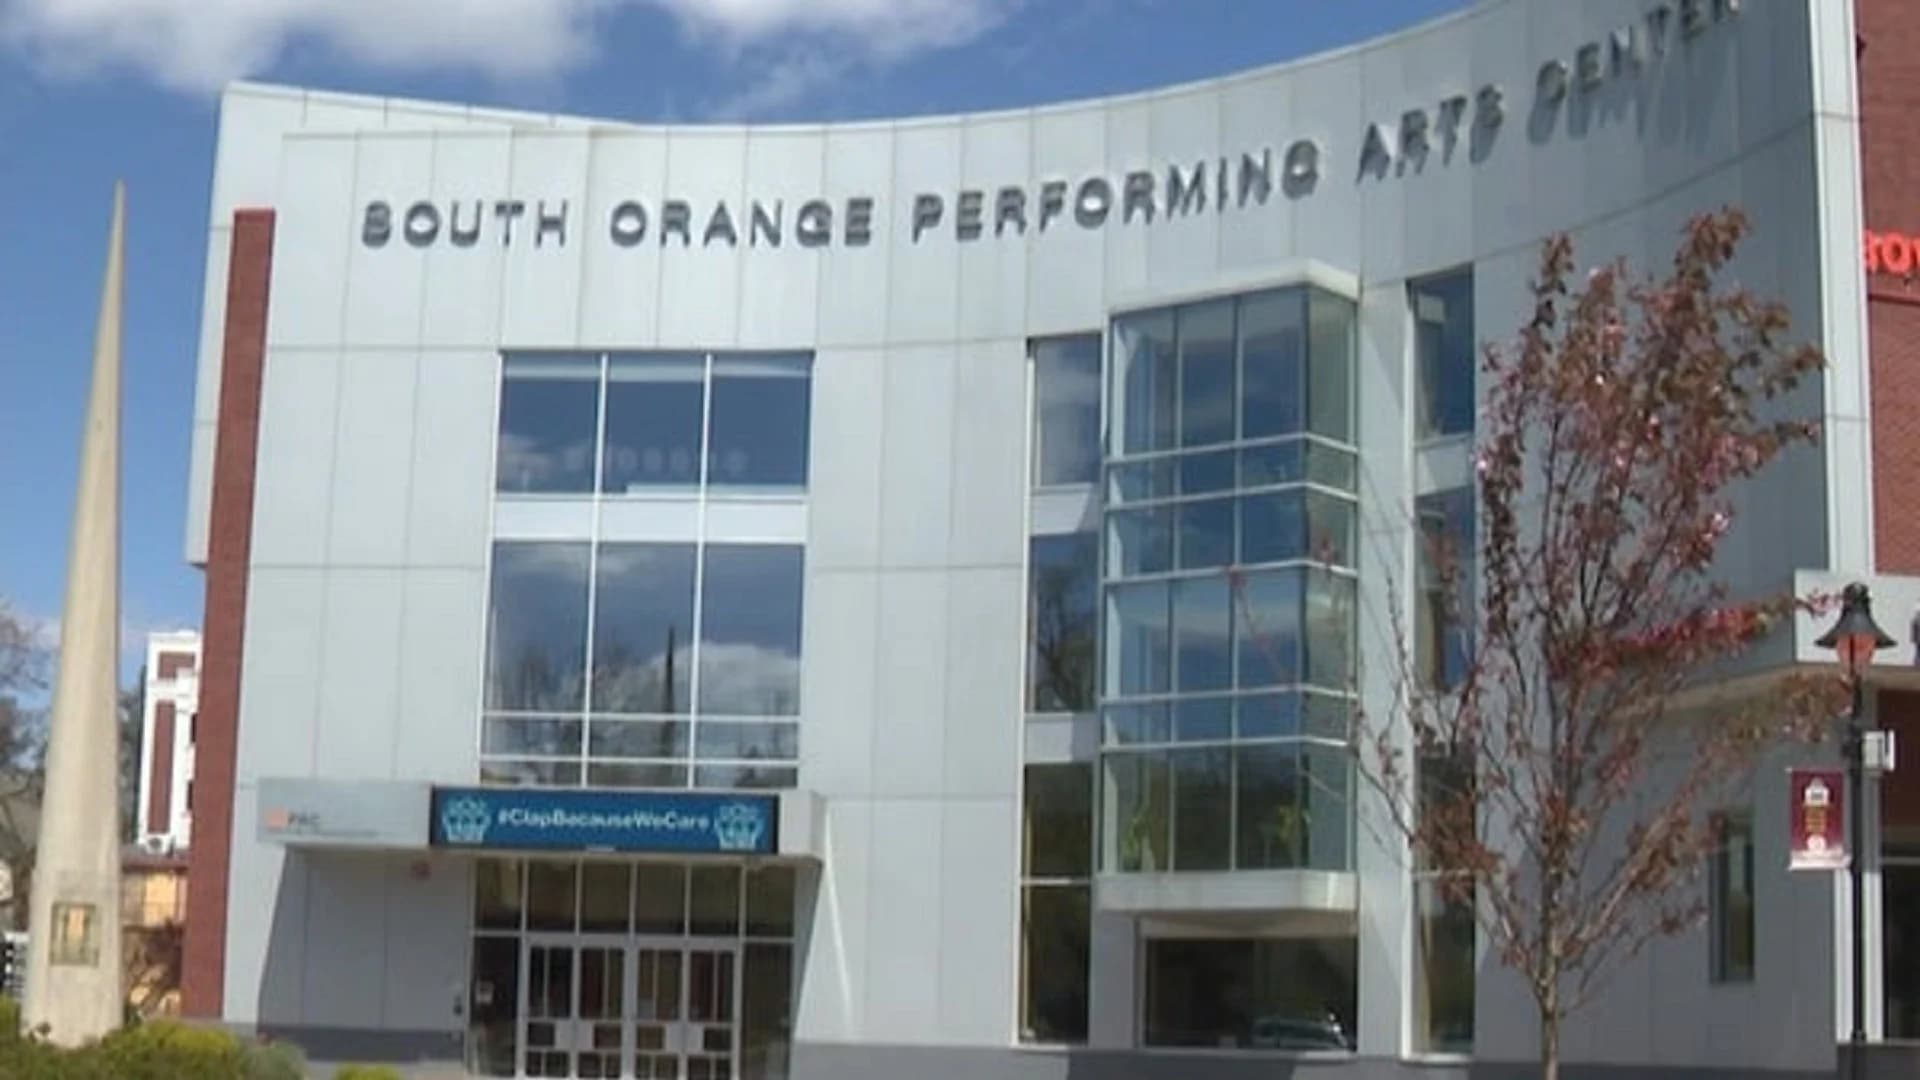 South Orange Performing Arts Center to require vaccine, negative COVID-19 test to attend shows